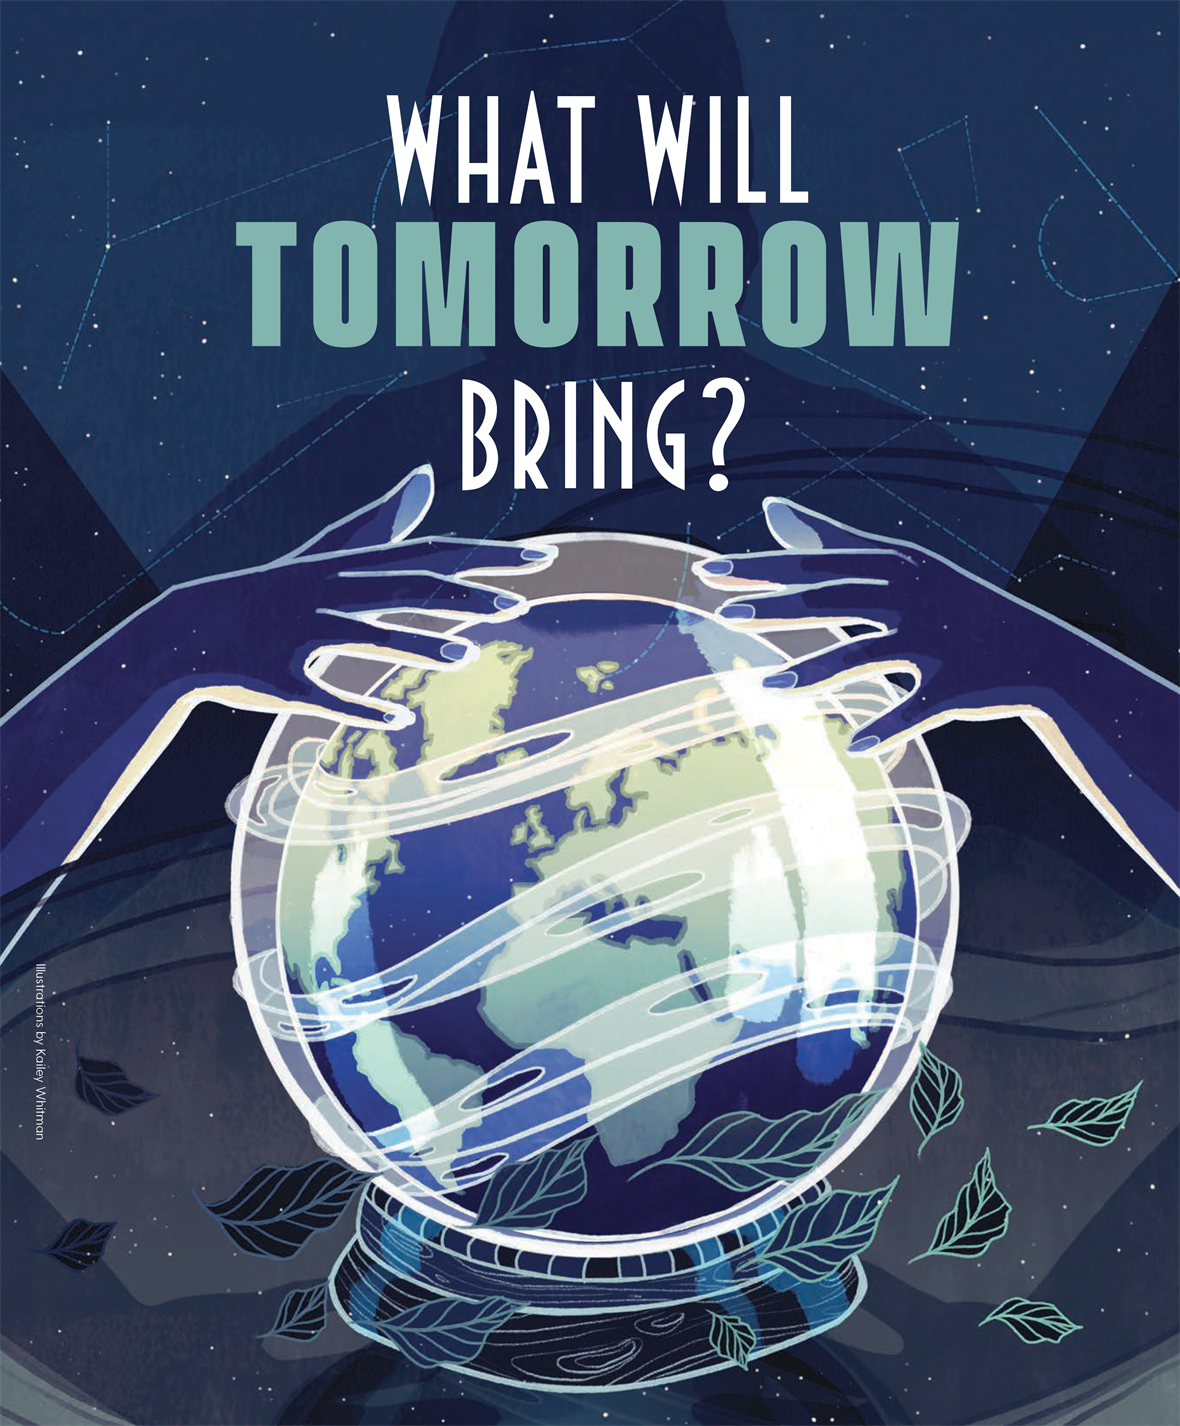 "What Will Tomorrow Bring?" appears in UD Magazine, Volume 26, Number 3